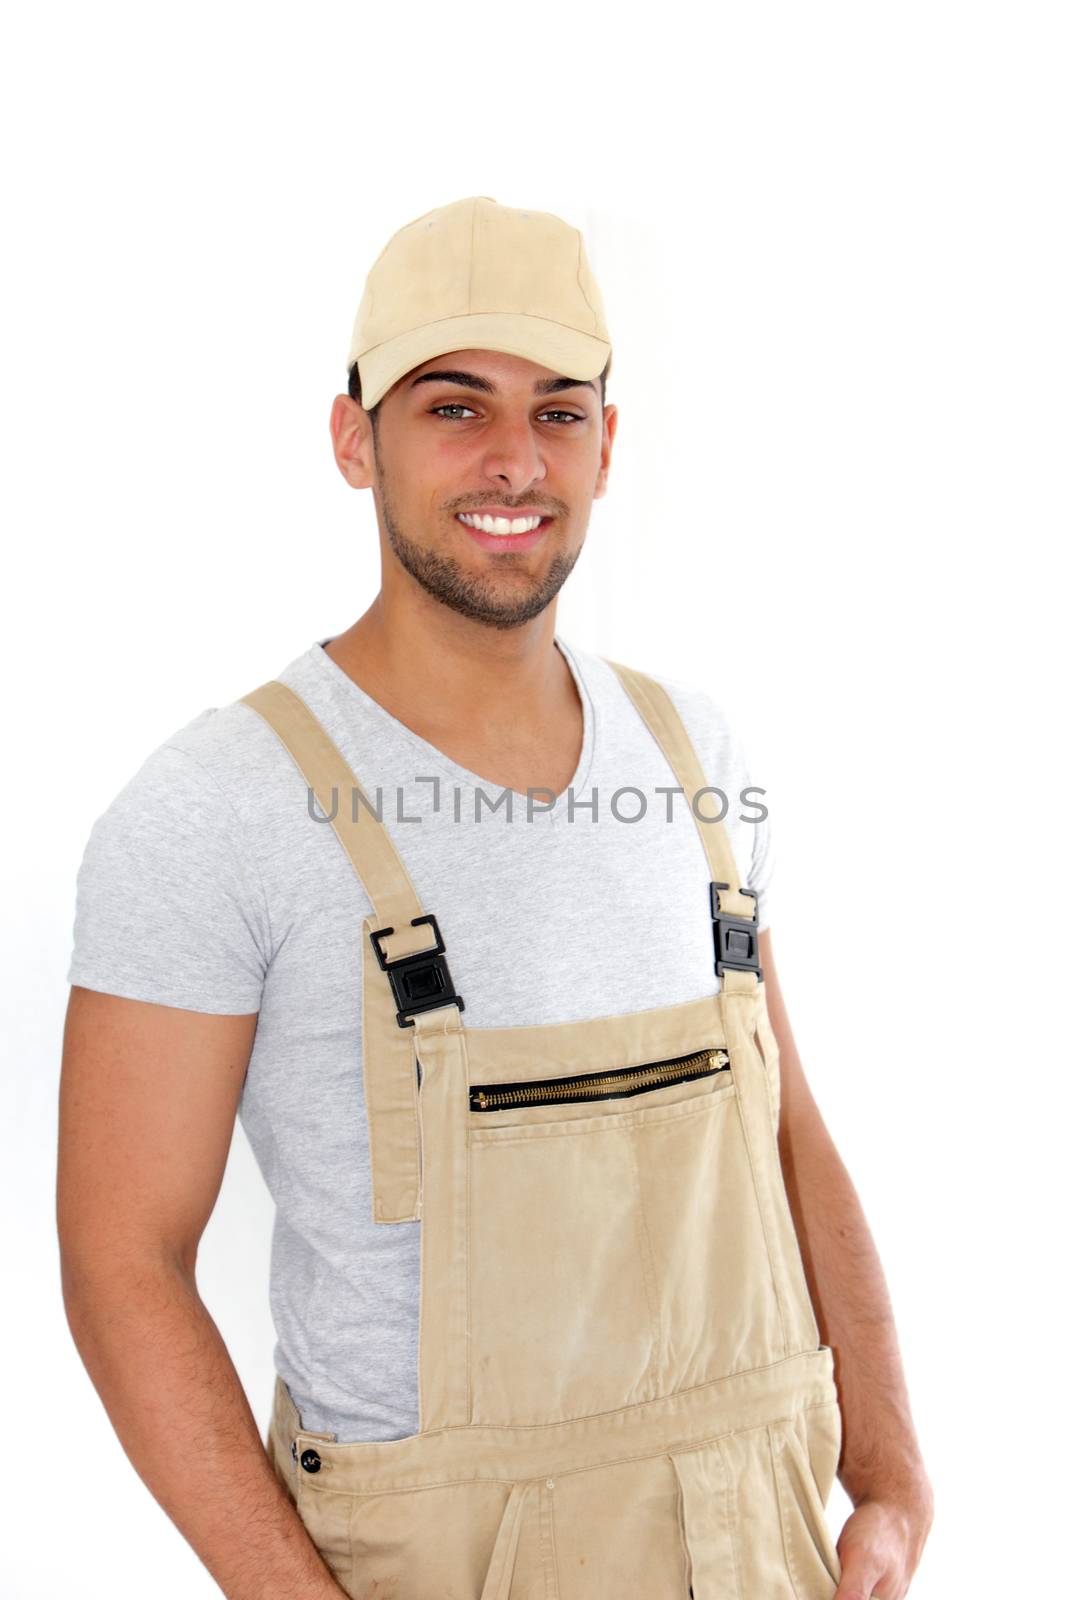 Handsome man in cap and dungarees by Farina6000